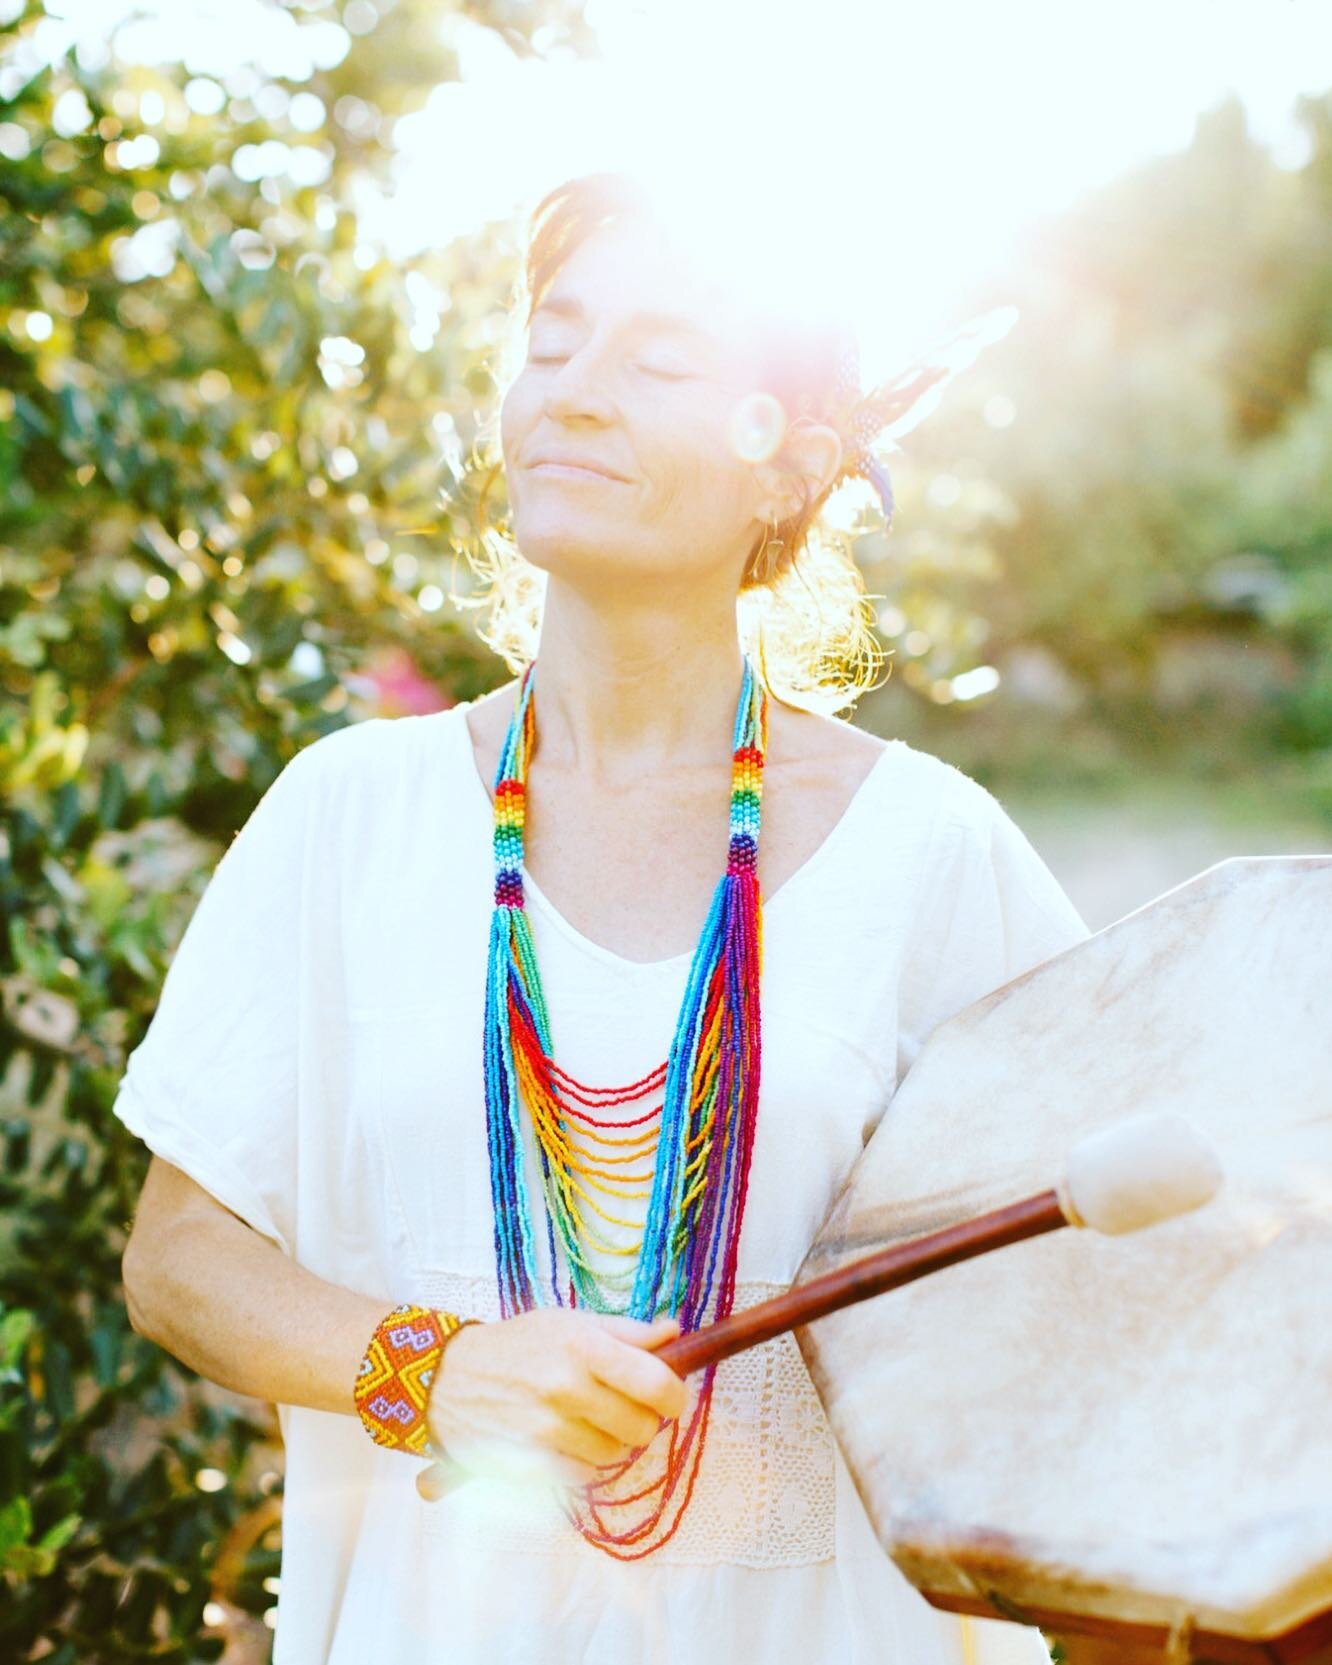 Nuria Del Sol is one of the Wellbeing Luminaries who I work with on my Retreats. She is a Medicine Woman &amp; Energy Worker who works with different Plant Medicines and also with Kambo. 

Nuria creates a space of trust and guides us on our journeys 